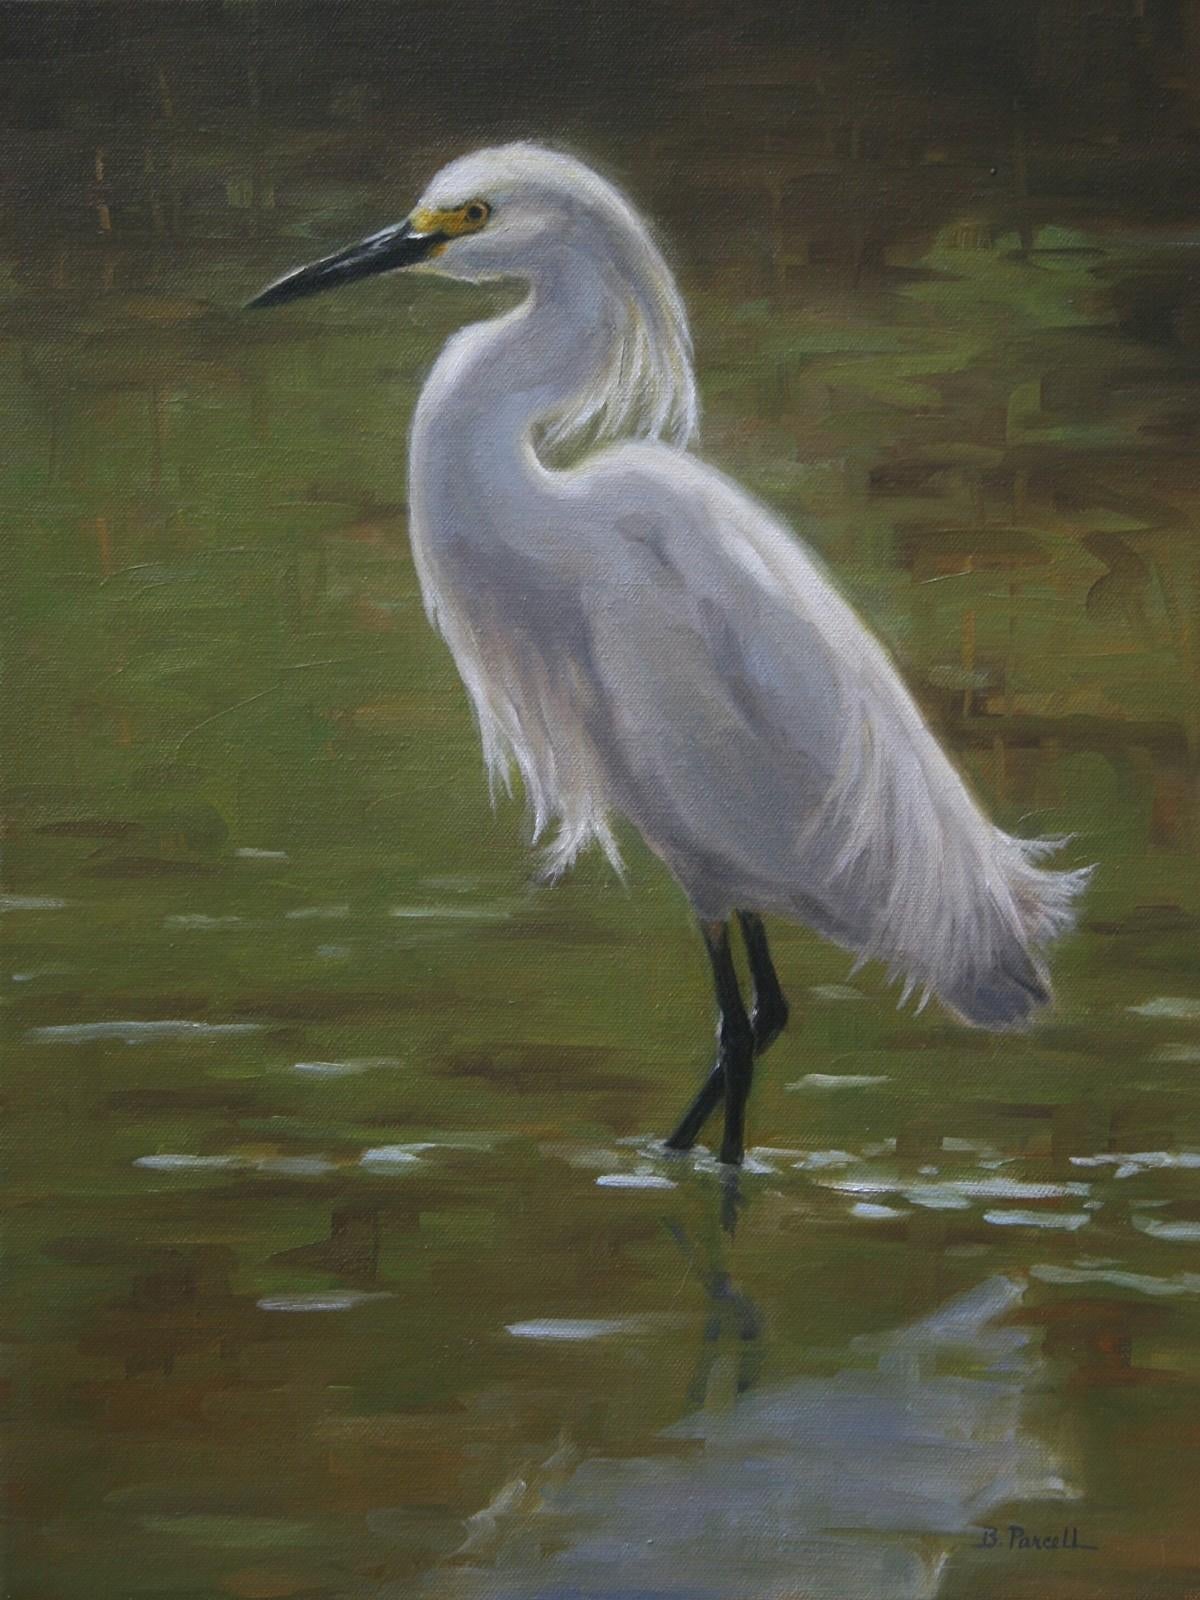 Beth Parcell  Animal Painting - Beth Parcell, "Snowy", 18x14 White Egret Waterscape Oil Painting on Canvas